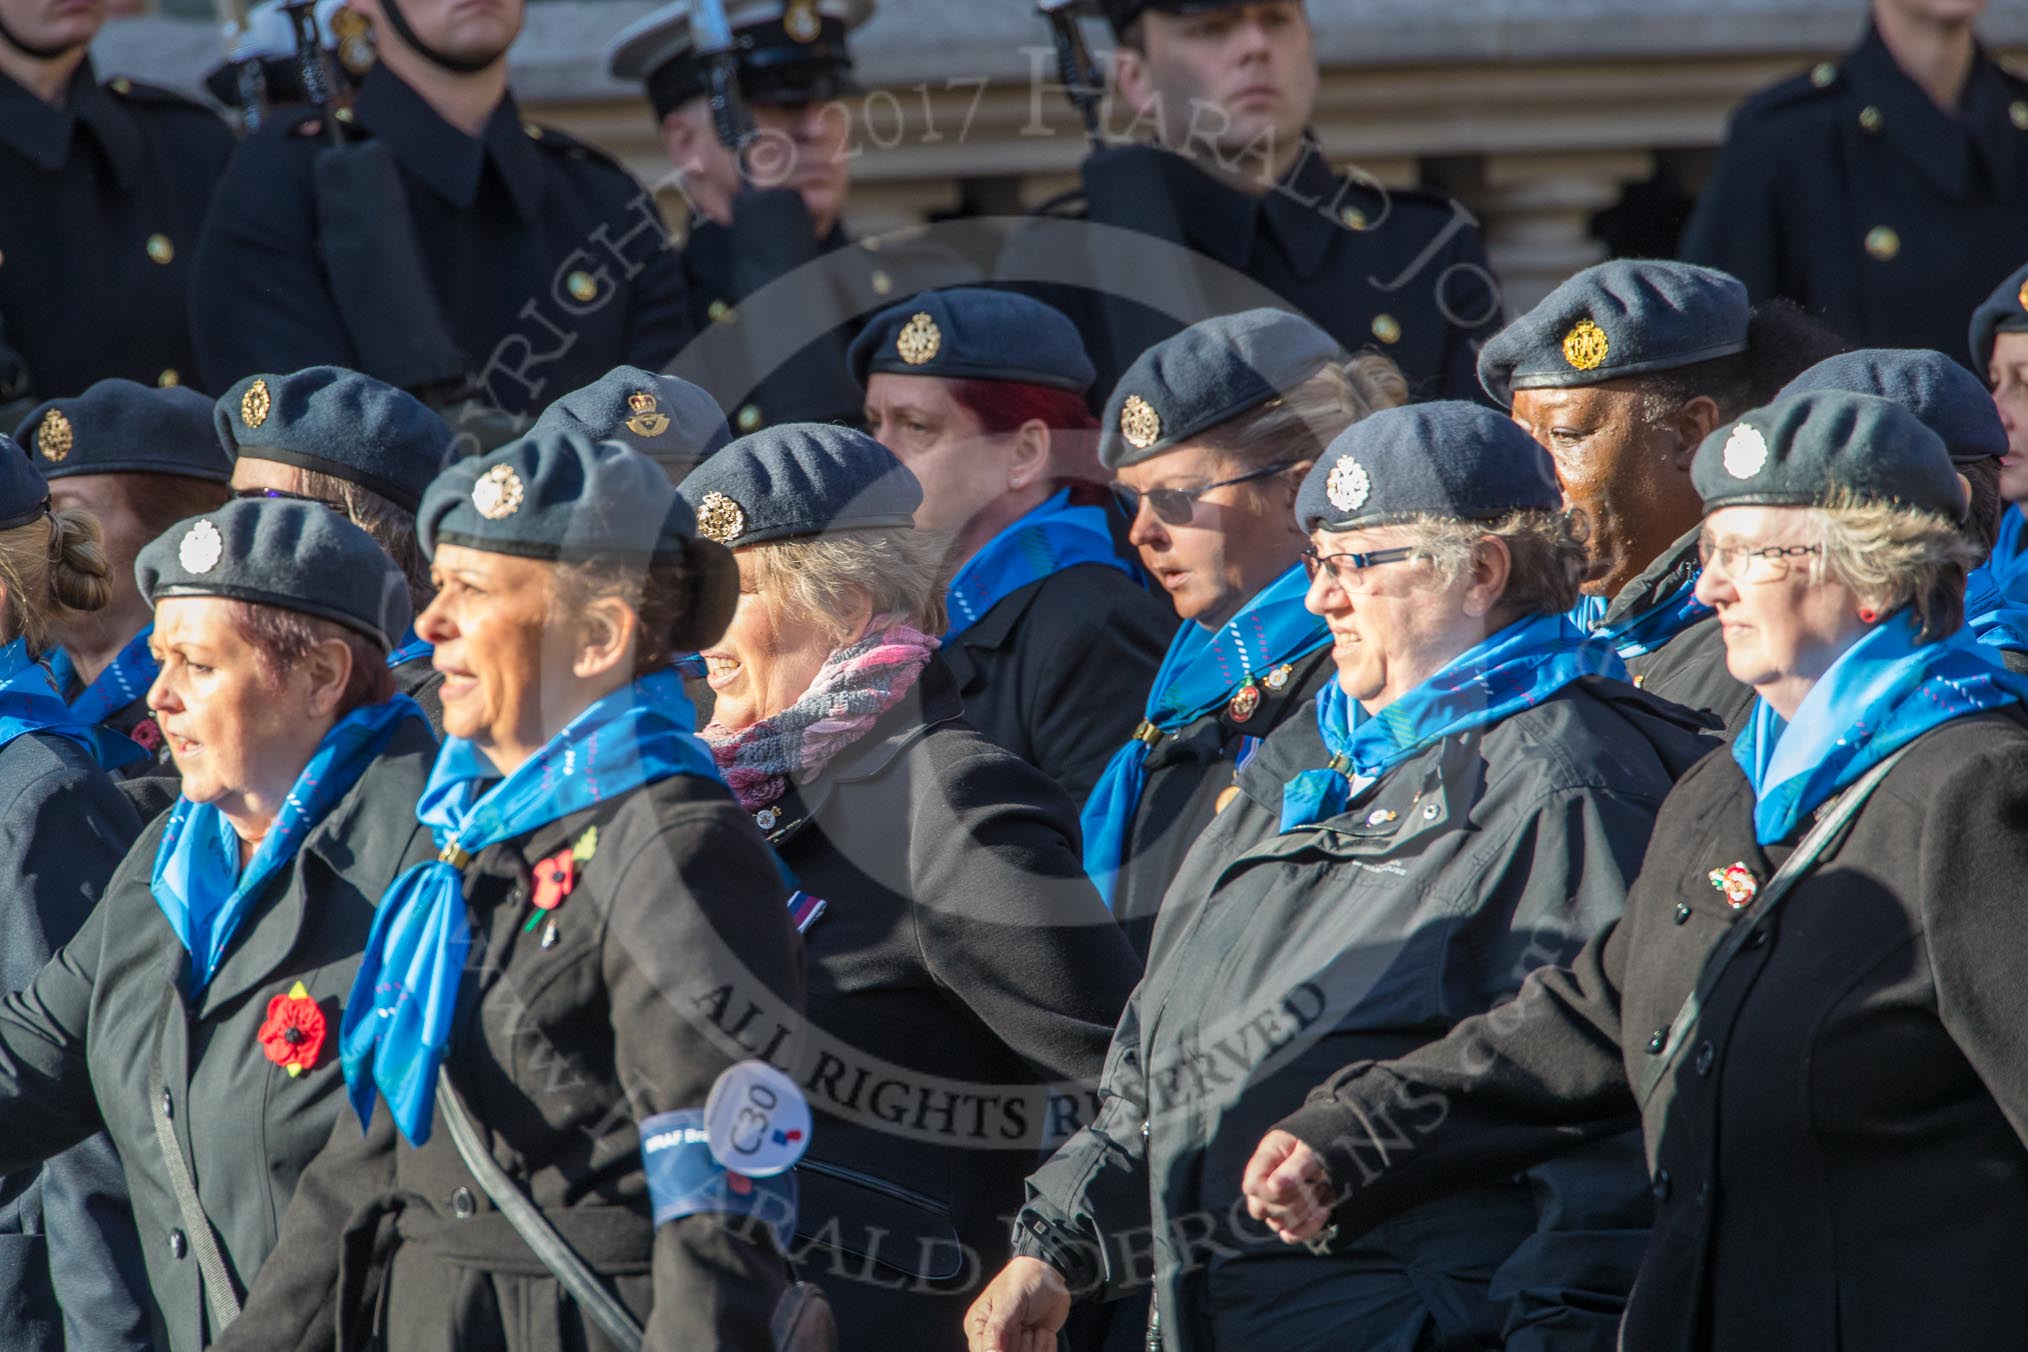 WRAF Branch of the Royal Air Forces Association (Group C30, 80 members) during the Royal British Legion March Past on Remembrance Sunday at the Cenotaph, Whitehall, Westminster, London, 11 November 2018, 12:19.